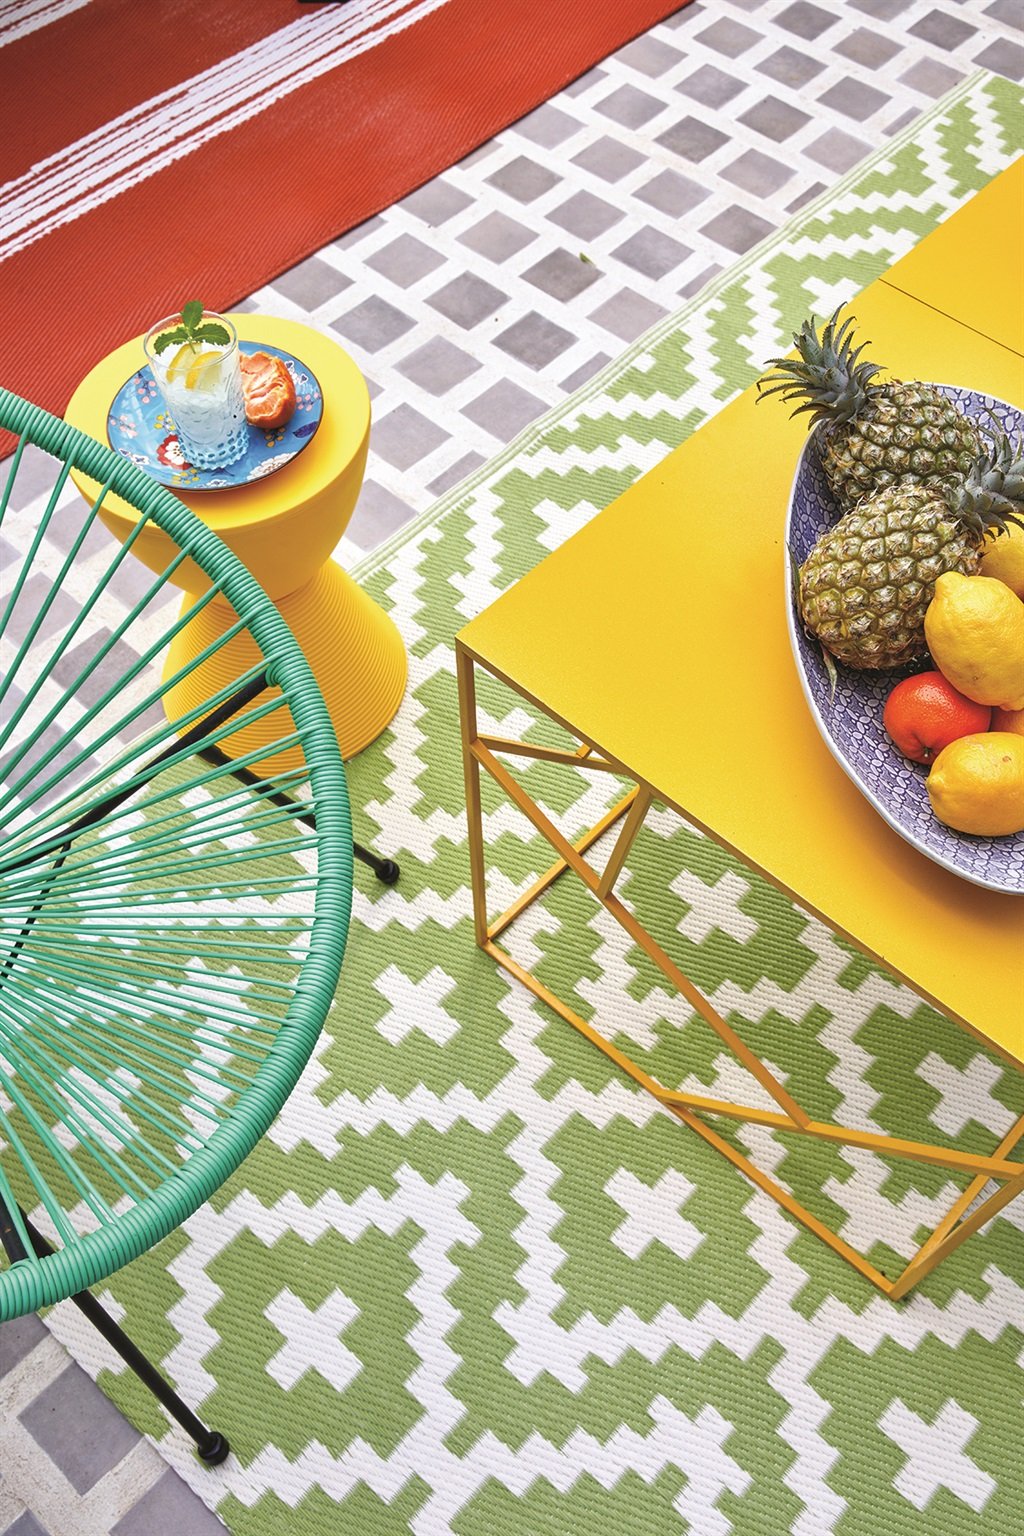 Yellow Wire World table available from Mink Design; green Acapulco chair from Chair 
Crazy; rugs from India Ink; side table from Esque; floor tiles from Ceramica.